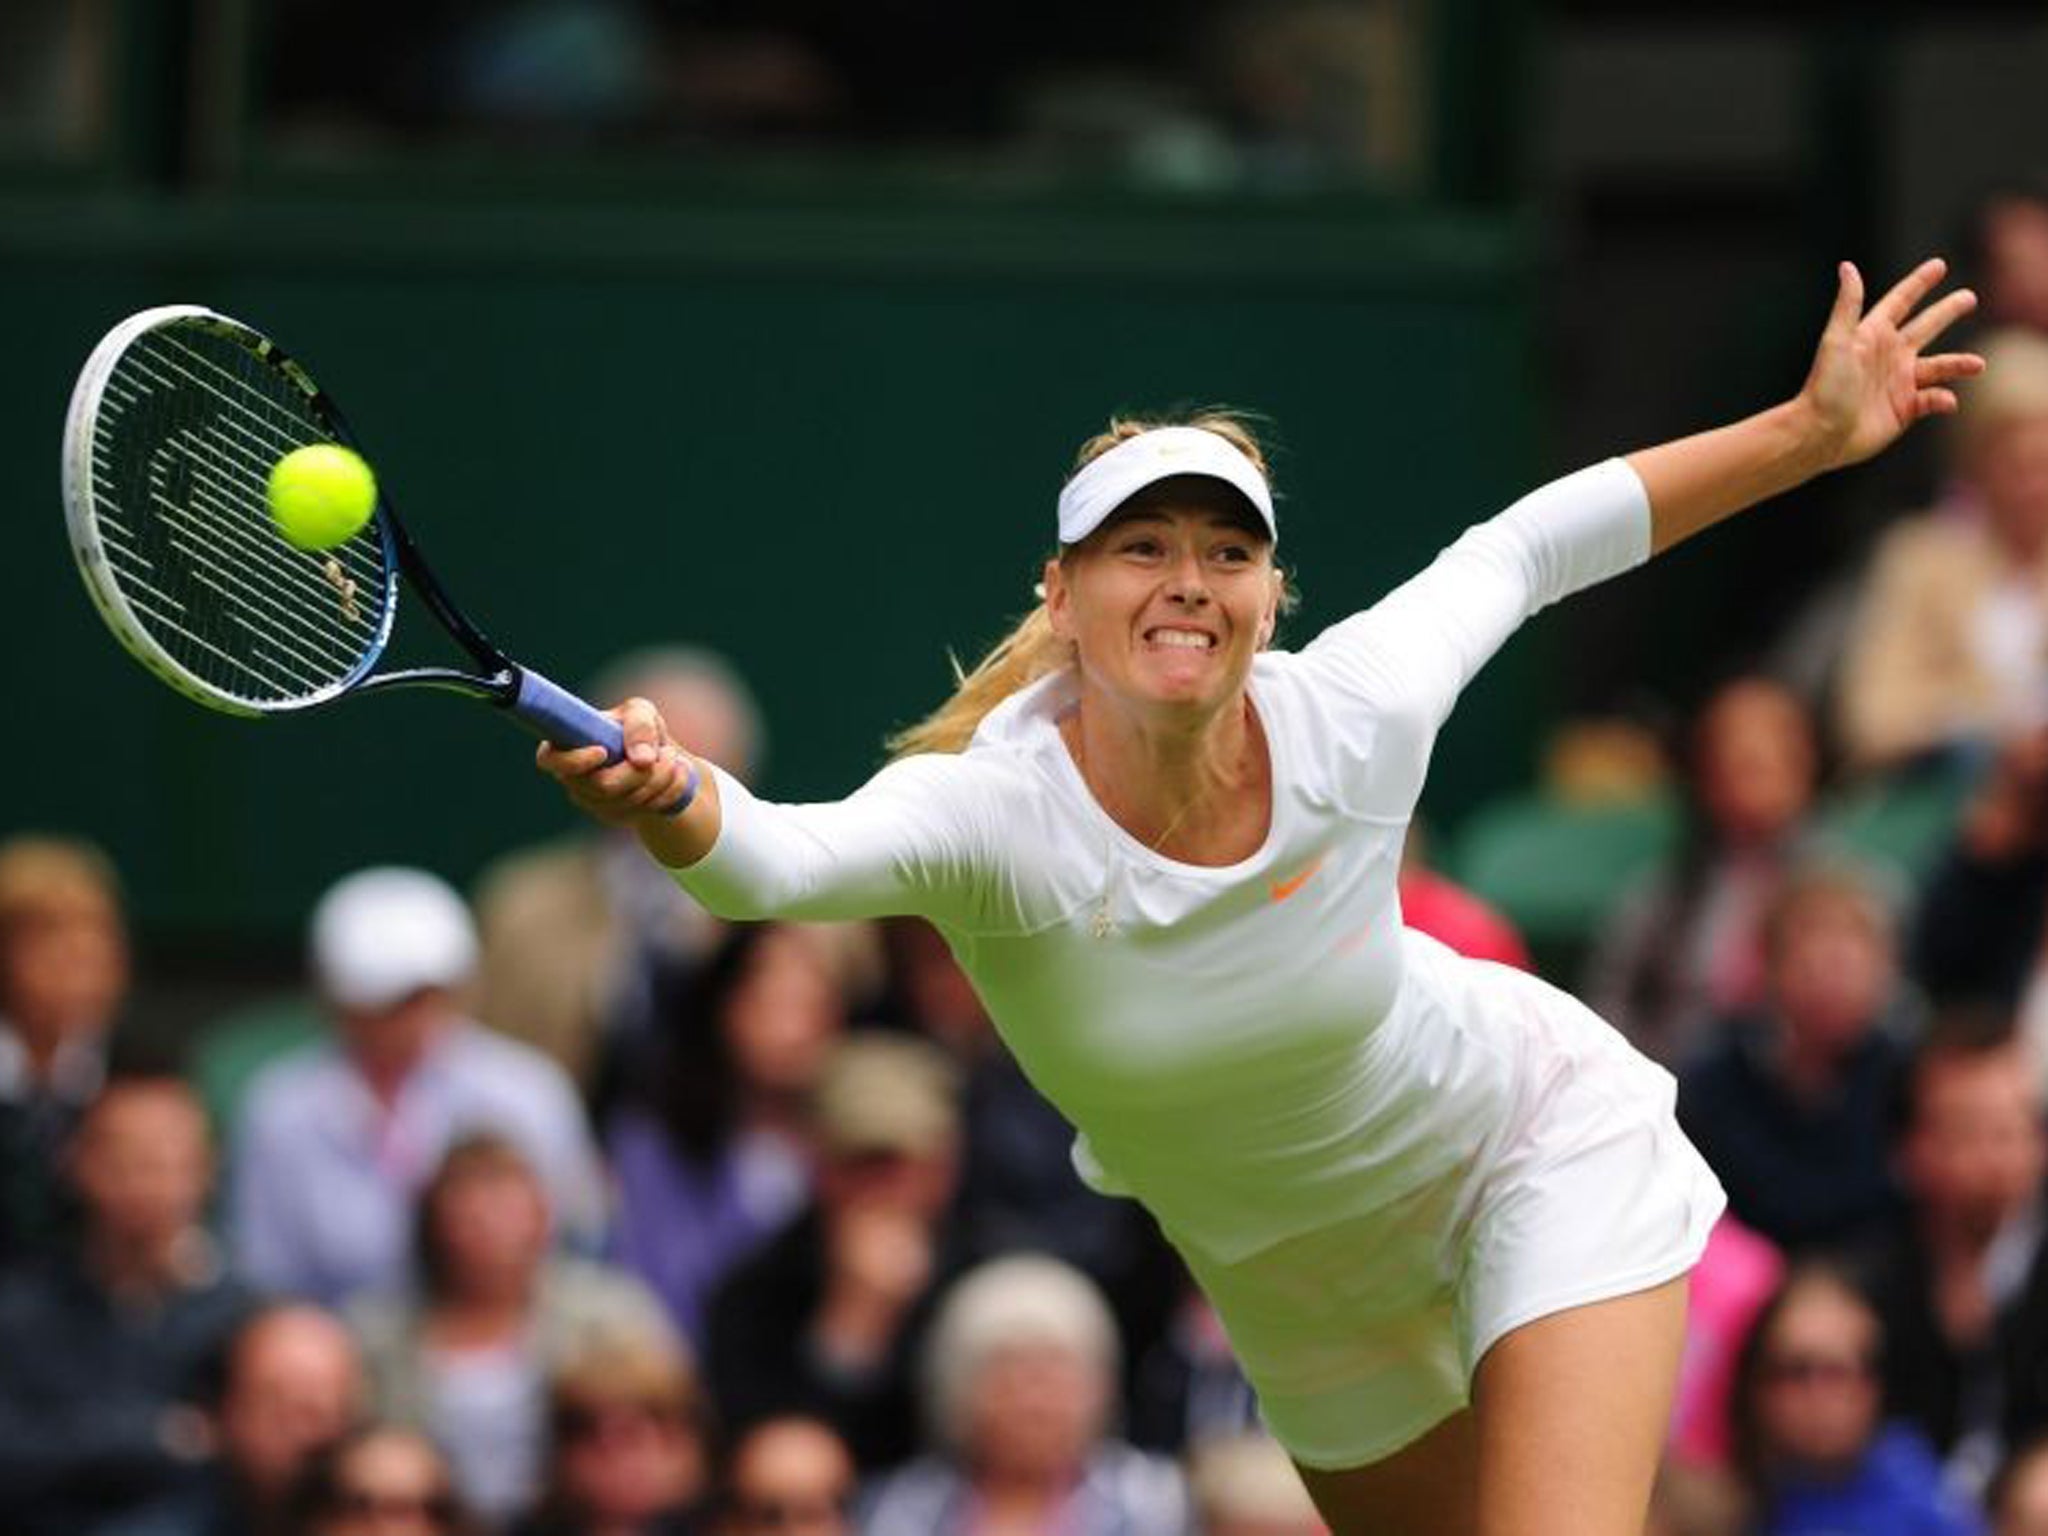 Kristina Mladenovic put Maria Sharapova under intense pressure in the opening set before the class of the world number three began to tell, resulting in a 7-6 (7/5) 6-3 victory for the Russian